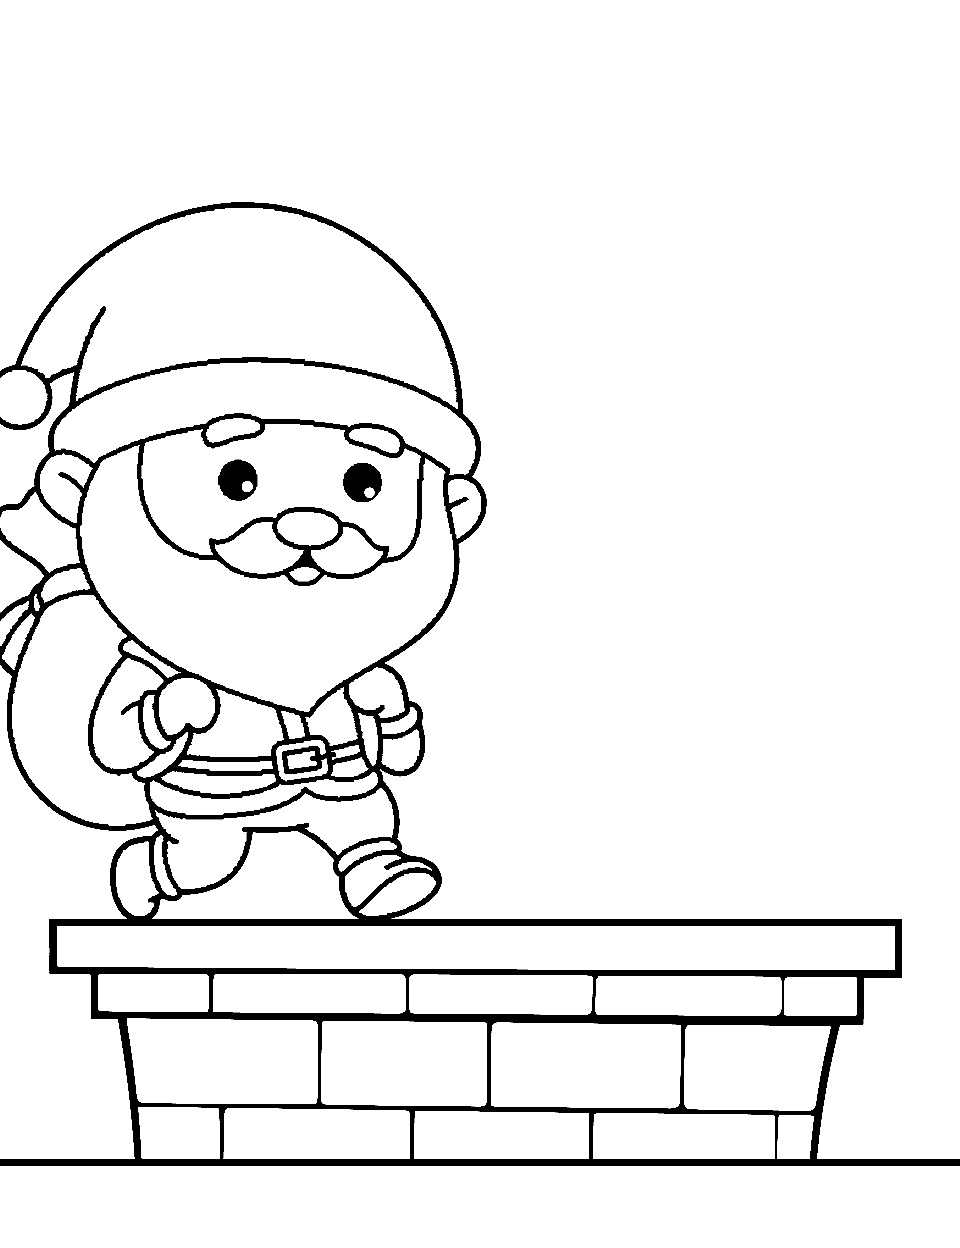 Santa Going Down the Chimney Coloring Page - Santa about to descend a chimney with his sack of gifts.